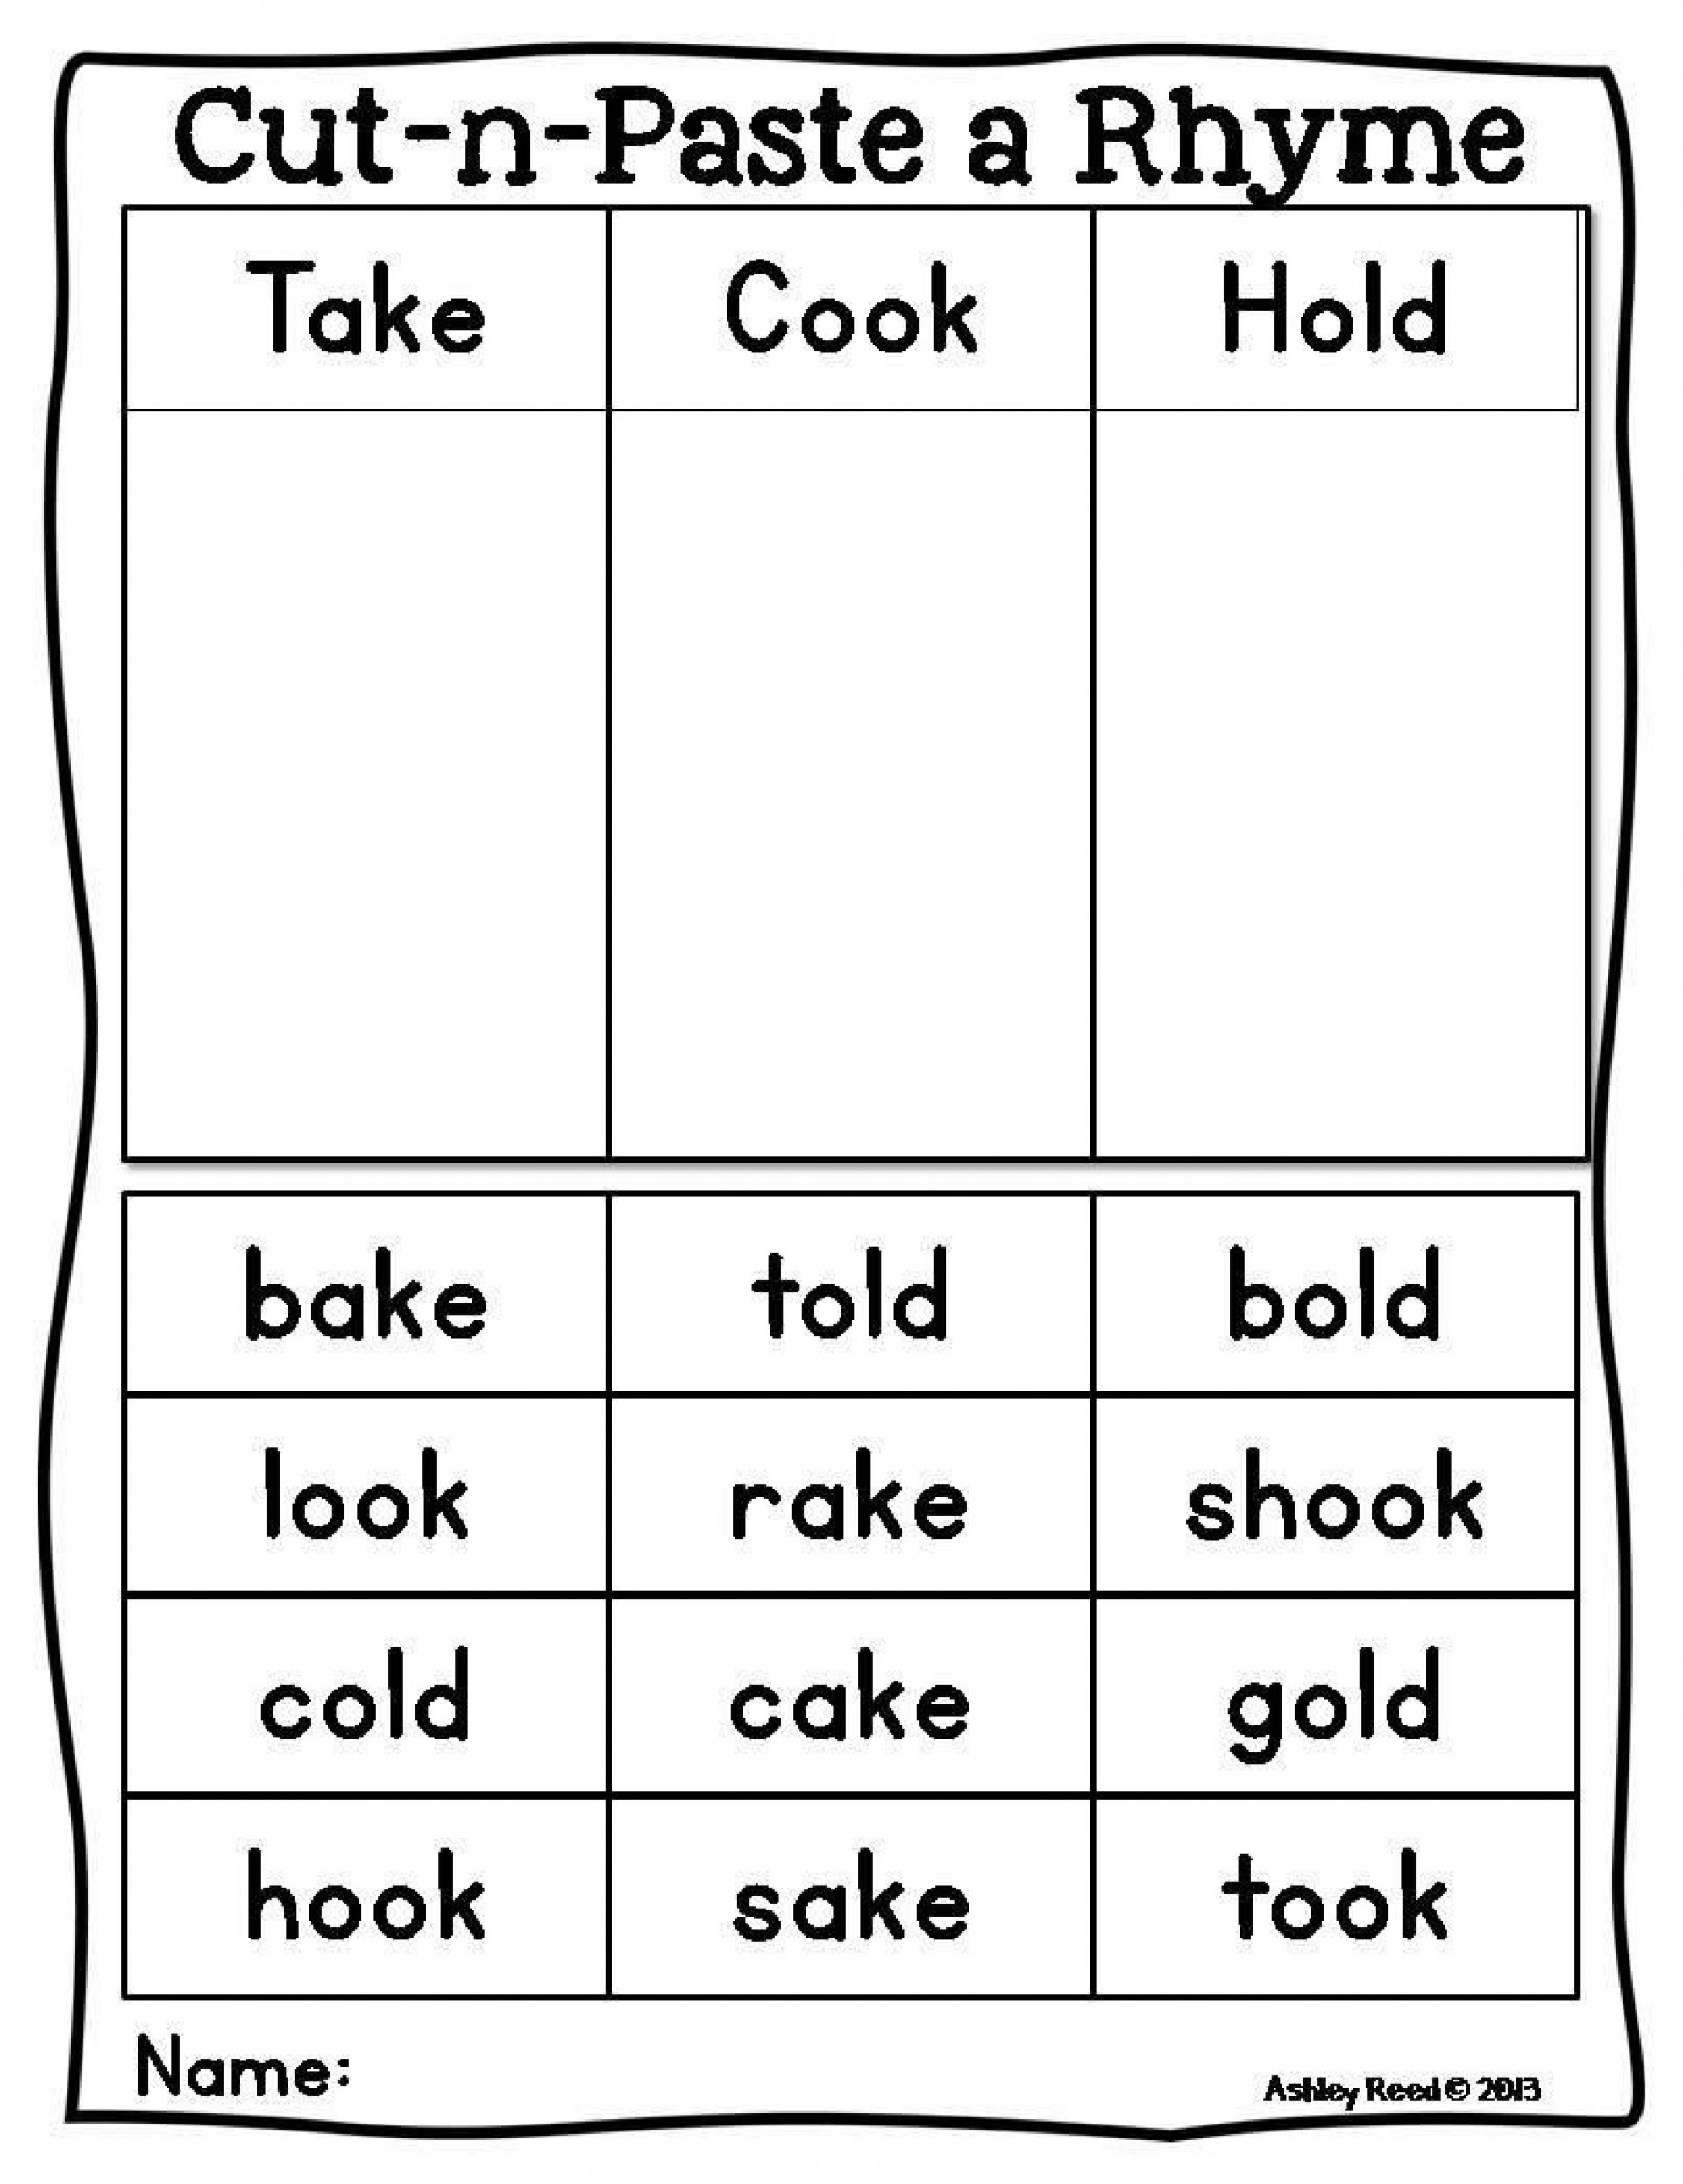 rhyming worksheets for kindergarten cut and paste db excelcom